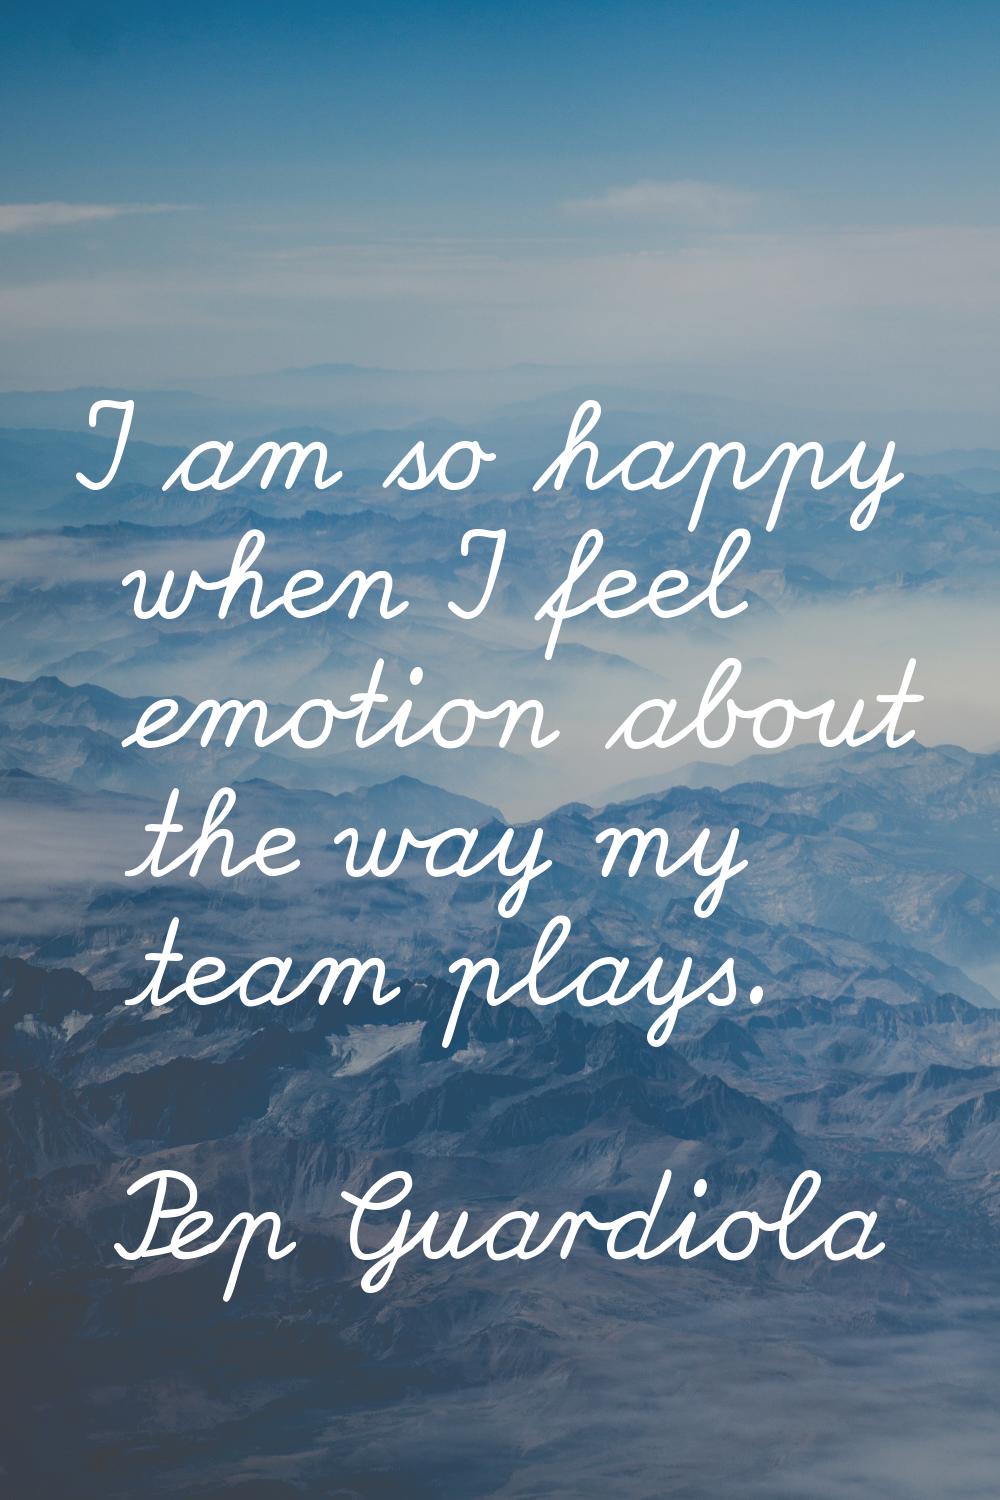 I am so happy when I feel emotion about the way my team plays.